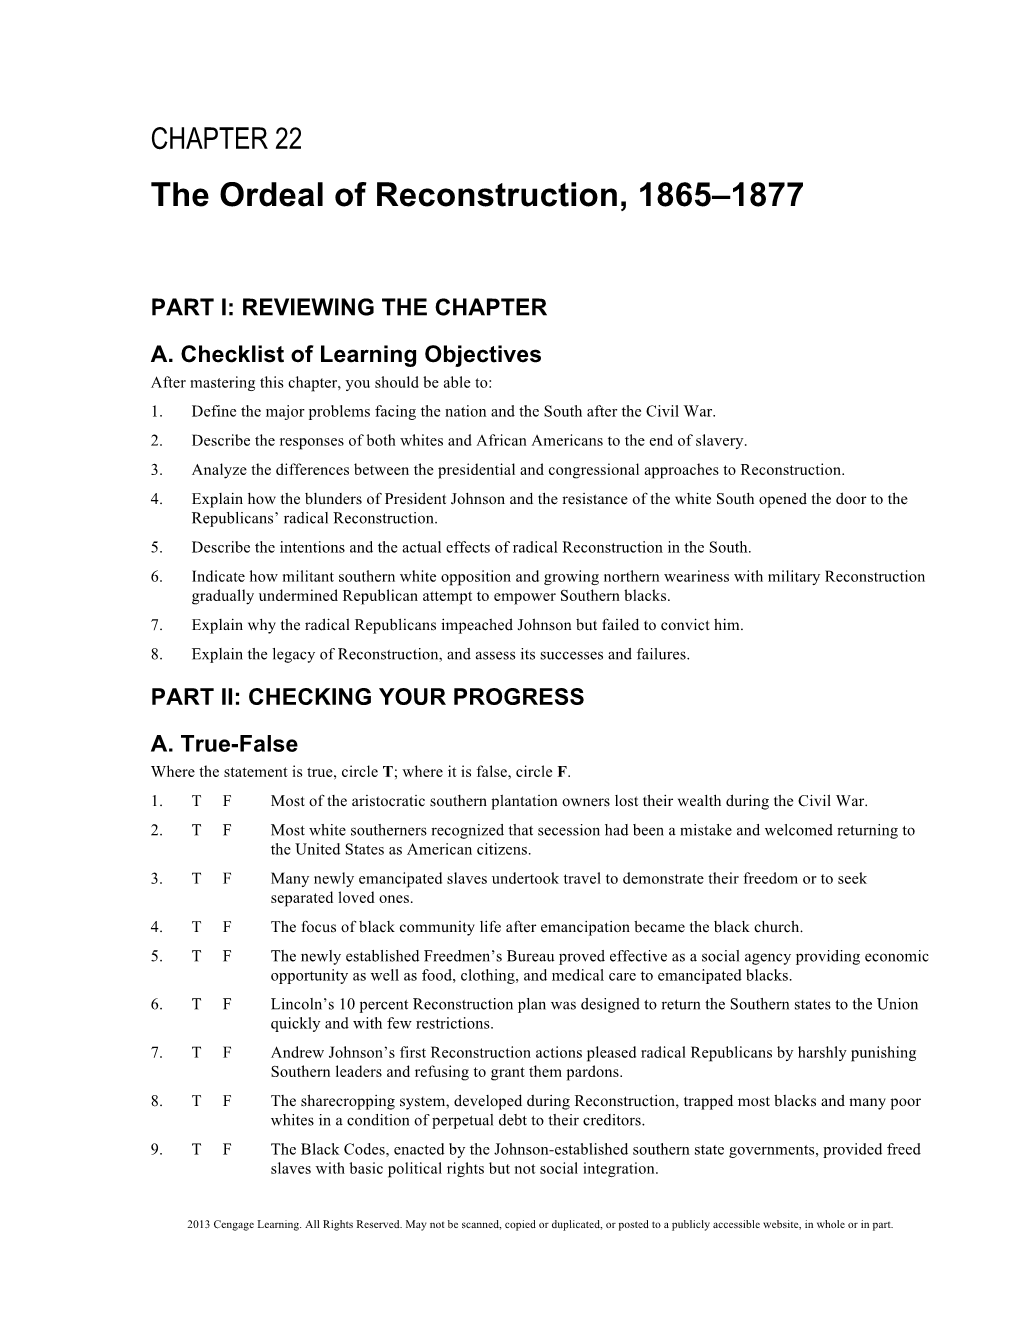 CHAPTER 22 the Ordeal of Reconstruction, 1865–1877